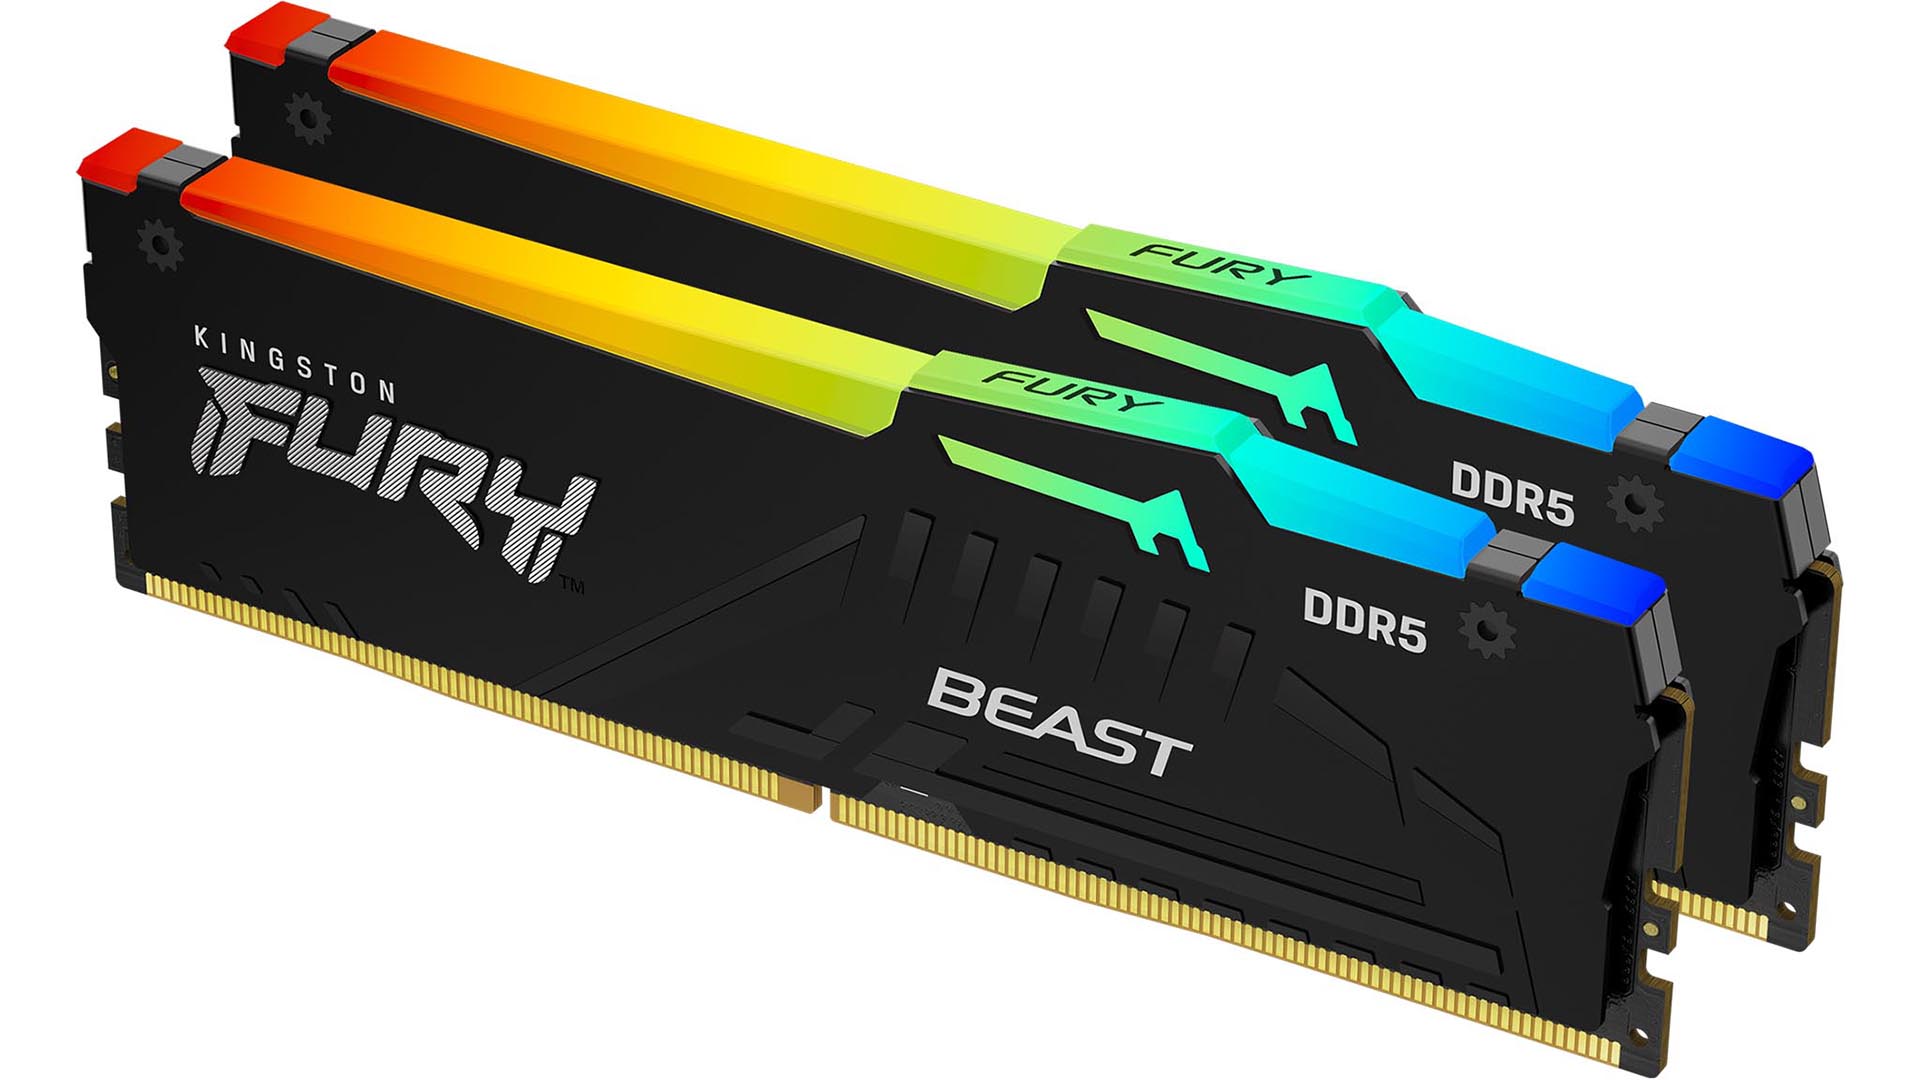 Unleashing the Beast: A Cheerful Review of Kingston Fury DDR5 RAM's Lightning-Fast Performance